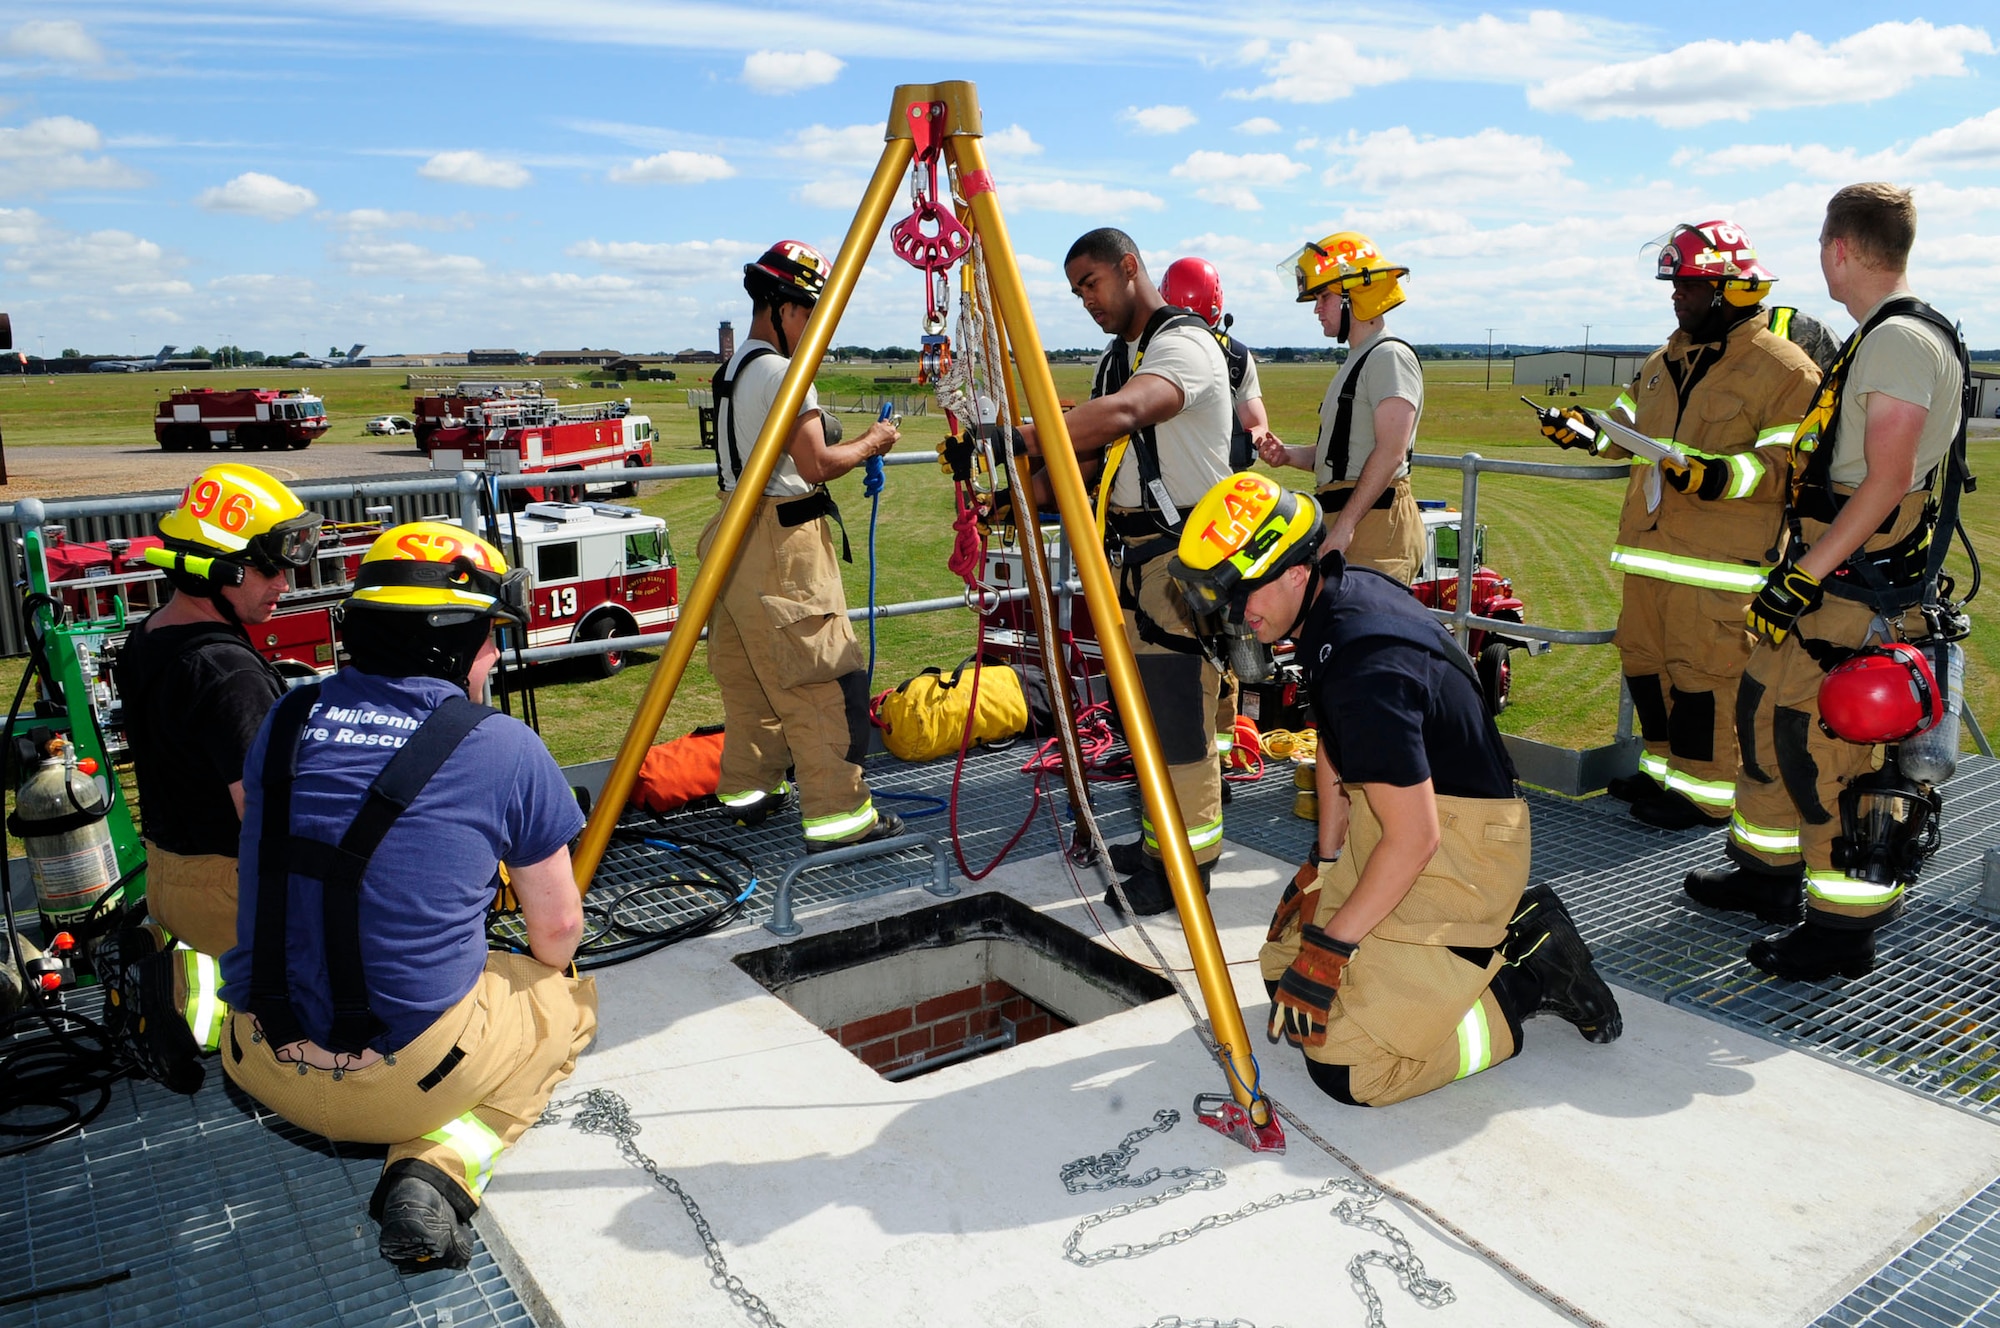 Firefighters from the 100th Civil Engineer Squadron Fire Department set up a tripod during confined space training June 26, 2014, on RAF Mildenhall, England. The training scenario involved a collapsed water pipe with a simulated child trapped inside. (U.S. Air Force photo/Karen Abeyasekere/Released)